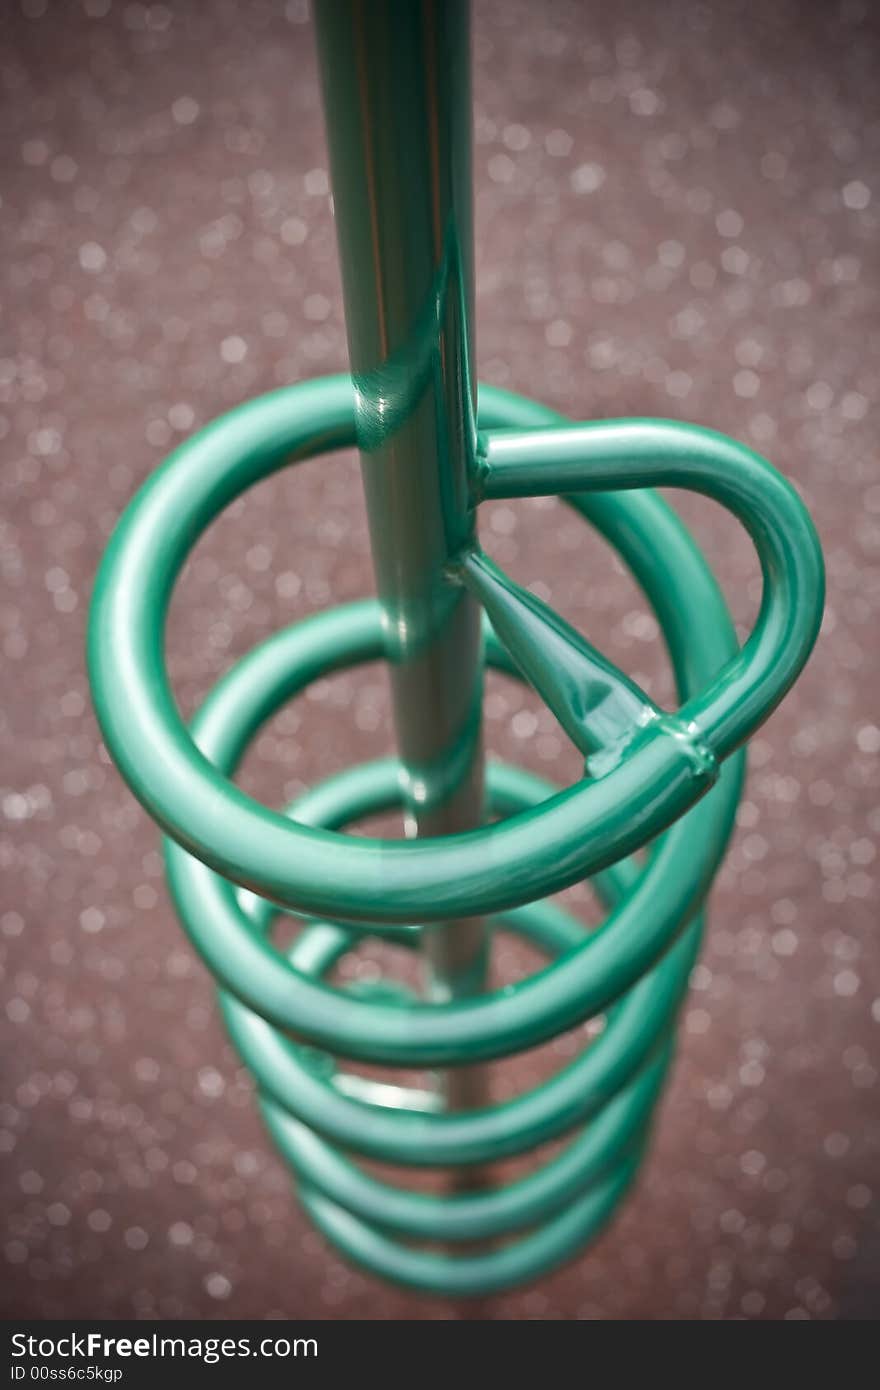 Teal green spiral climber at playground, great bokeh and depth of field